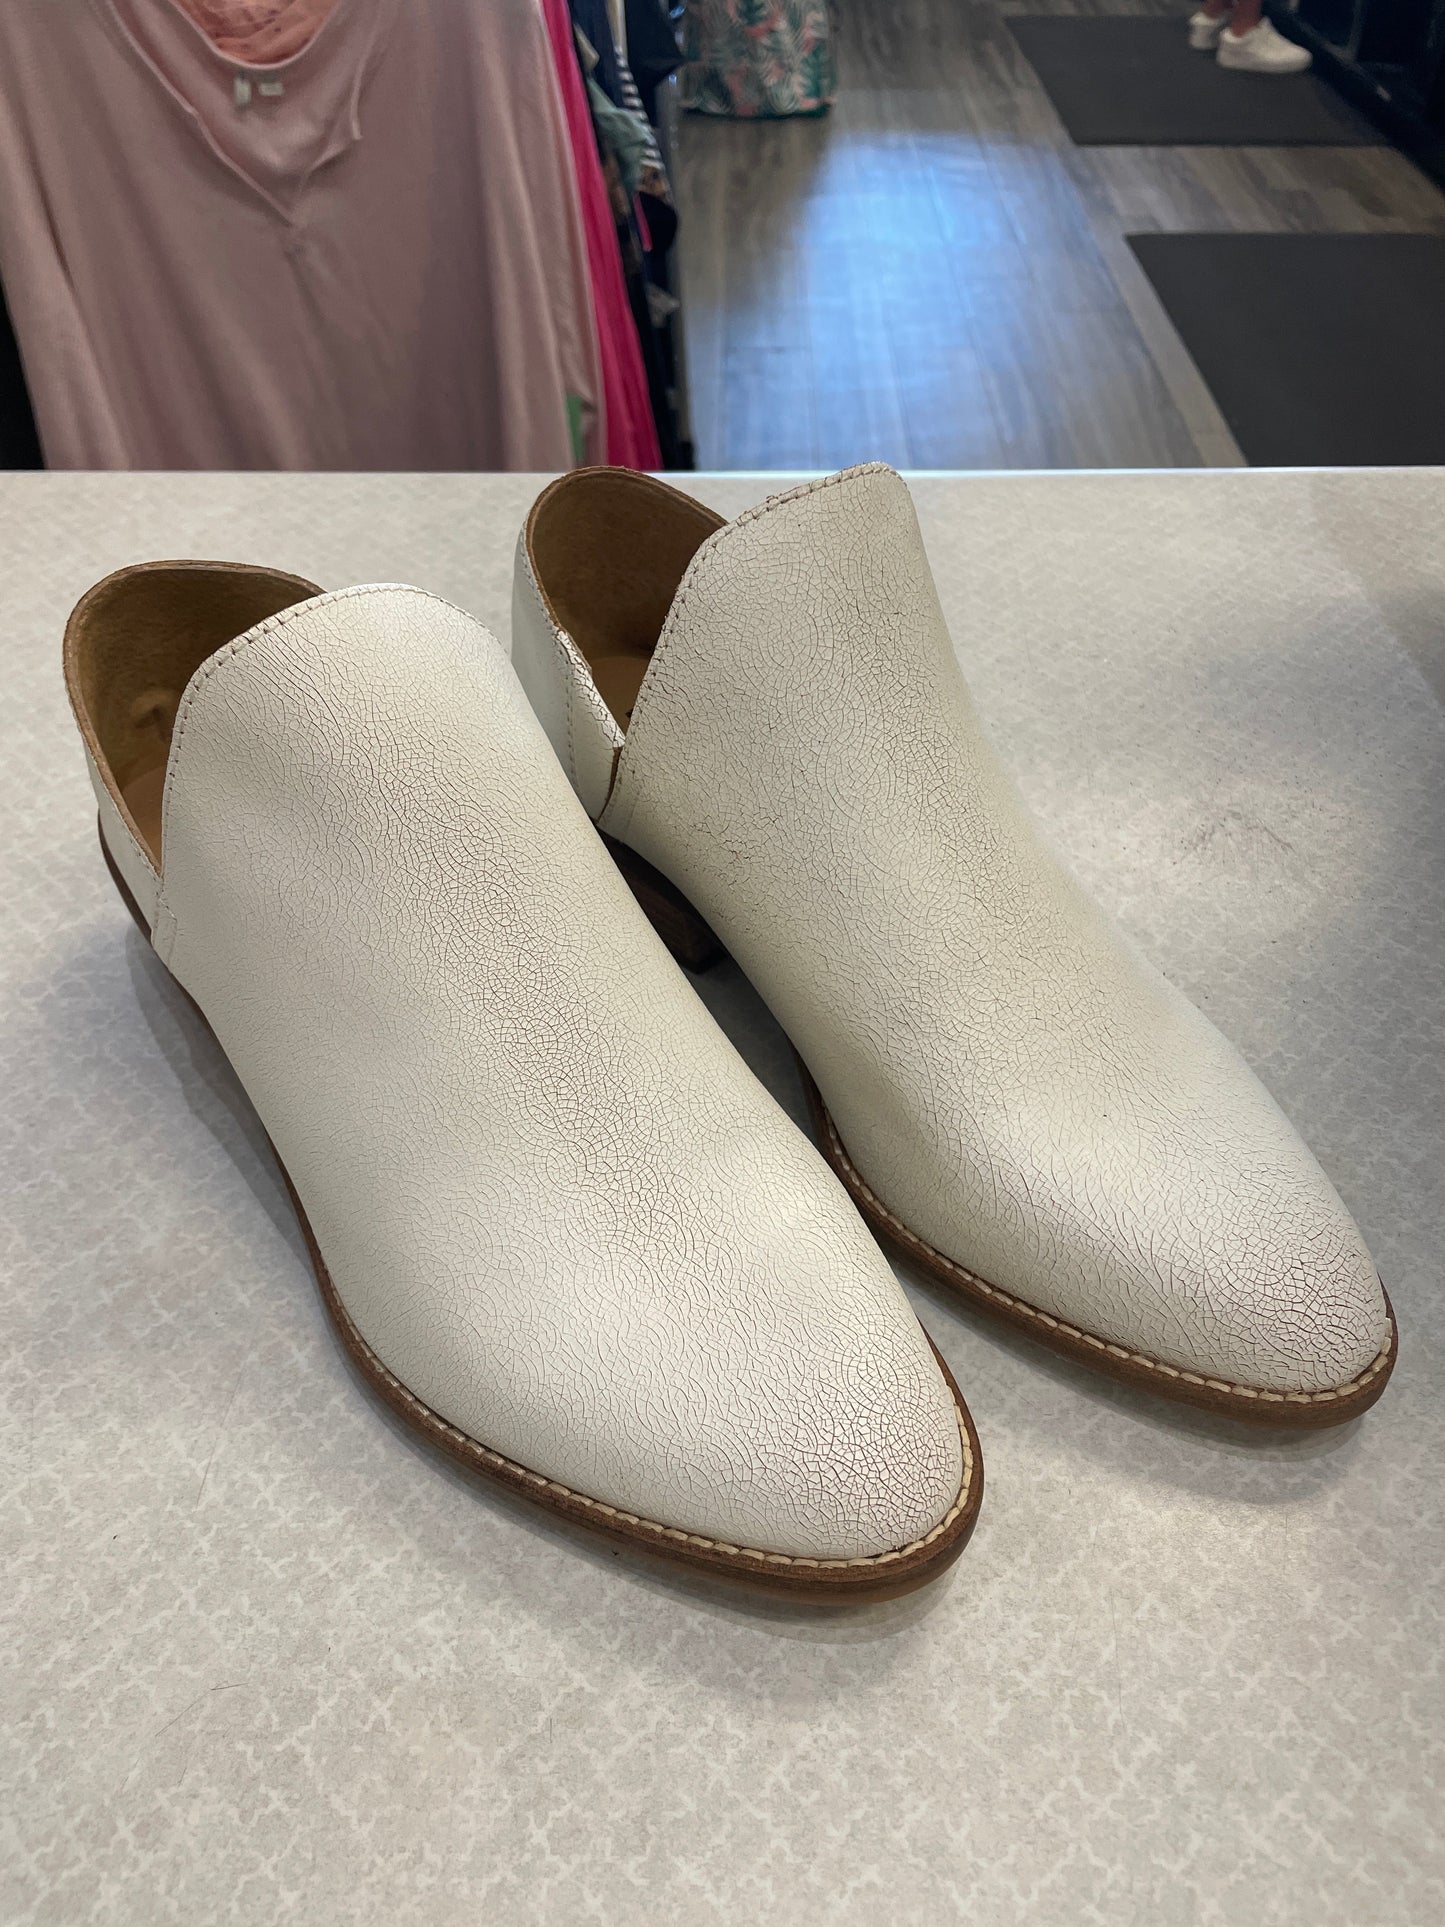 White Shoes Heels Block Lucky Brand, Size 9